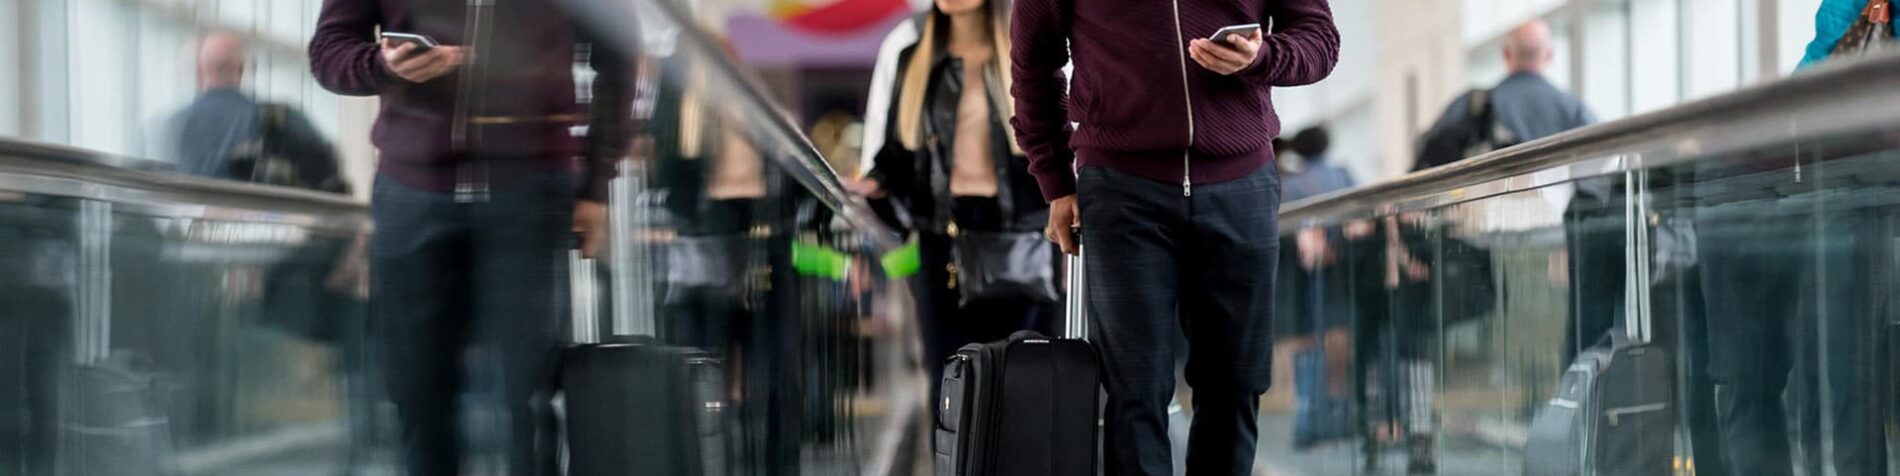 Majority Feel Business Travel Isn’t Offered Equally to All, SAP Concur Survey Finds